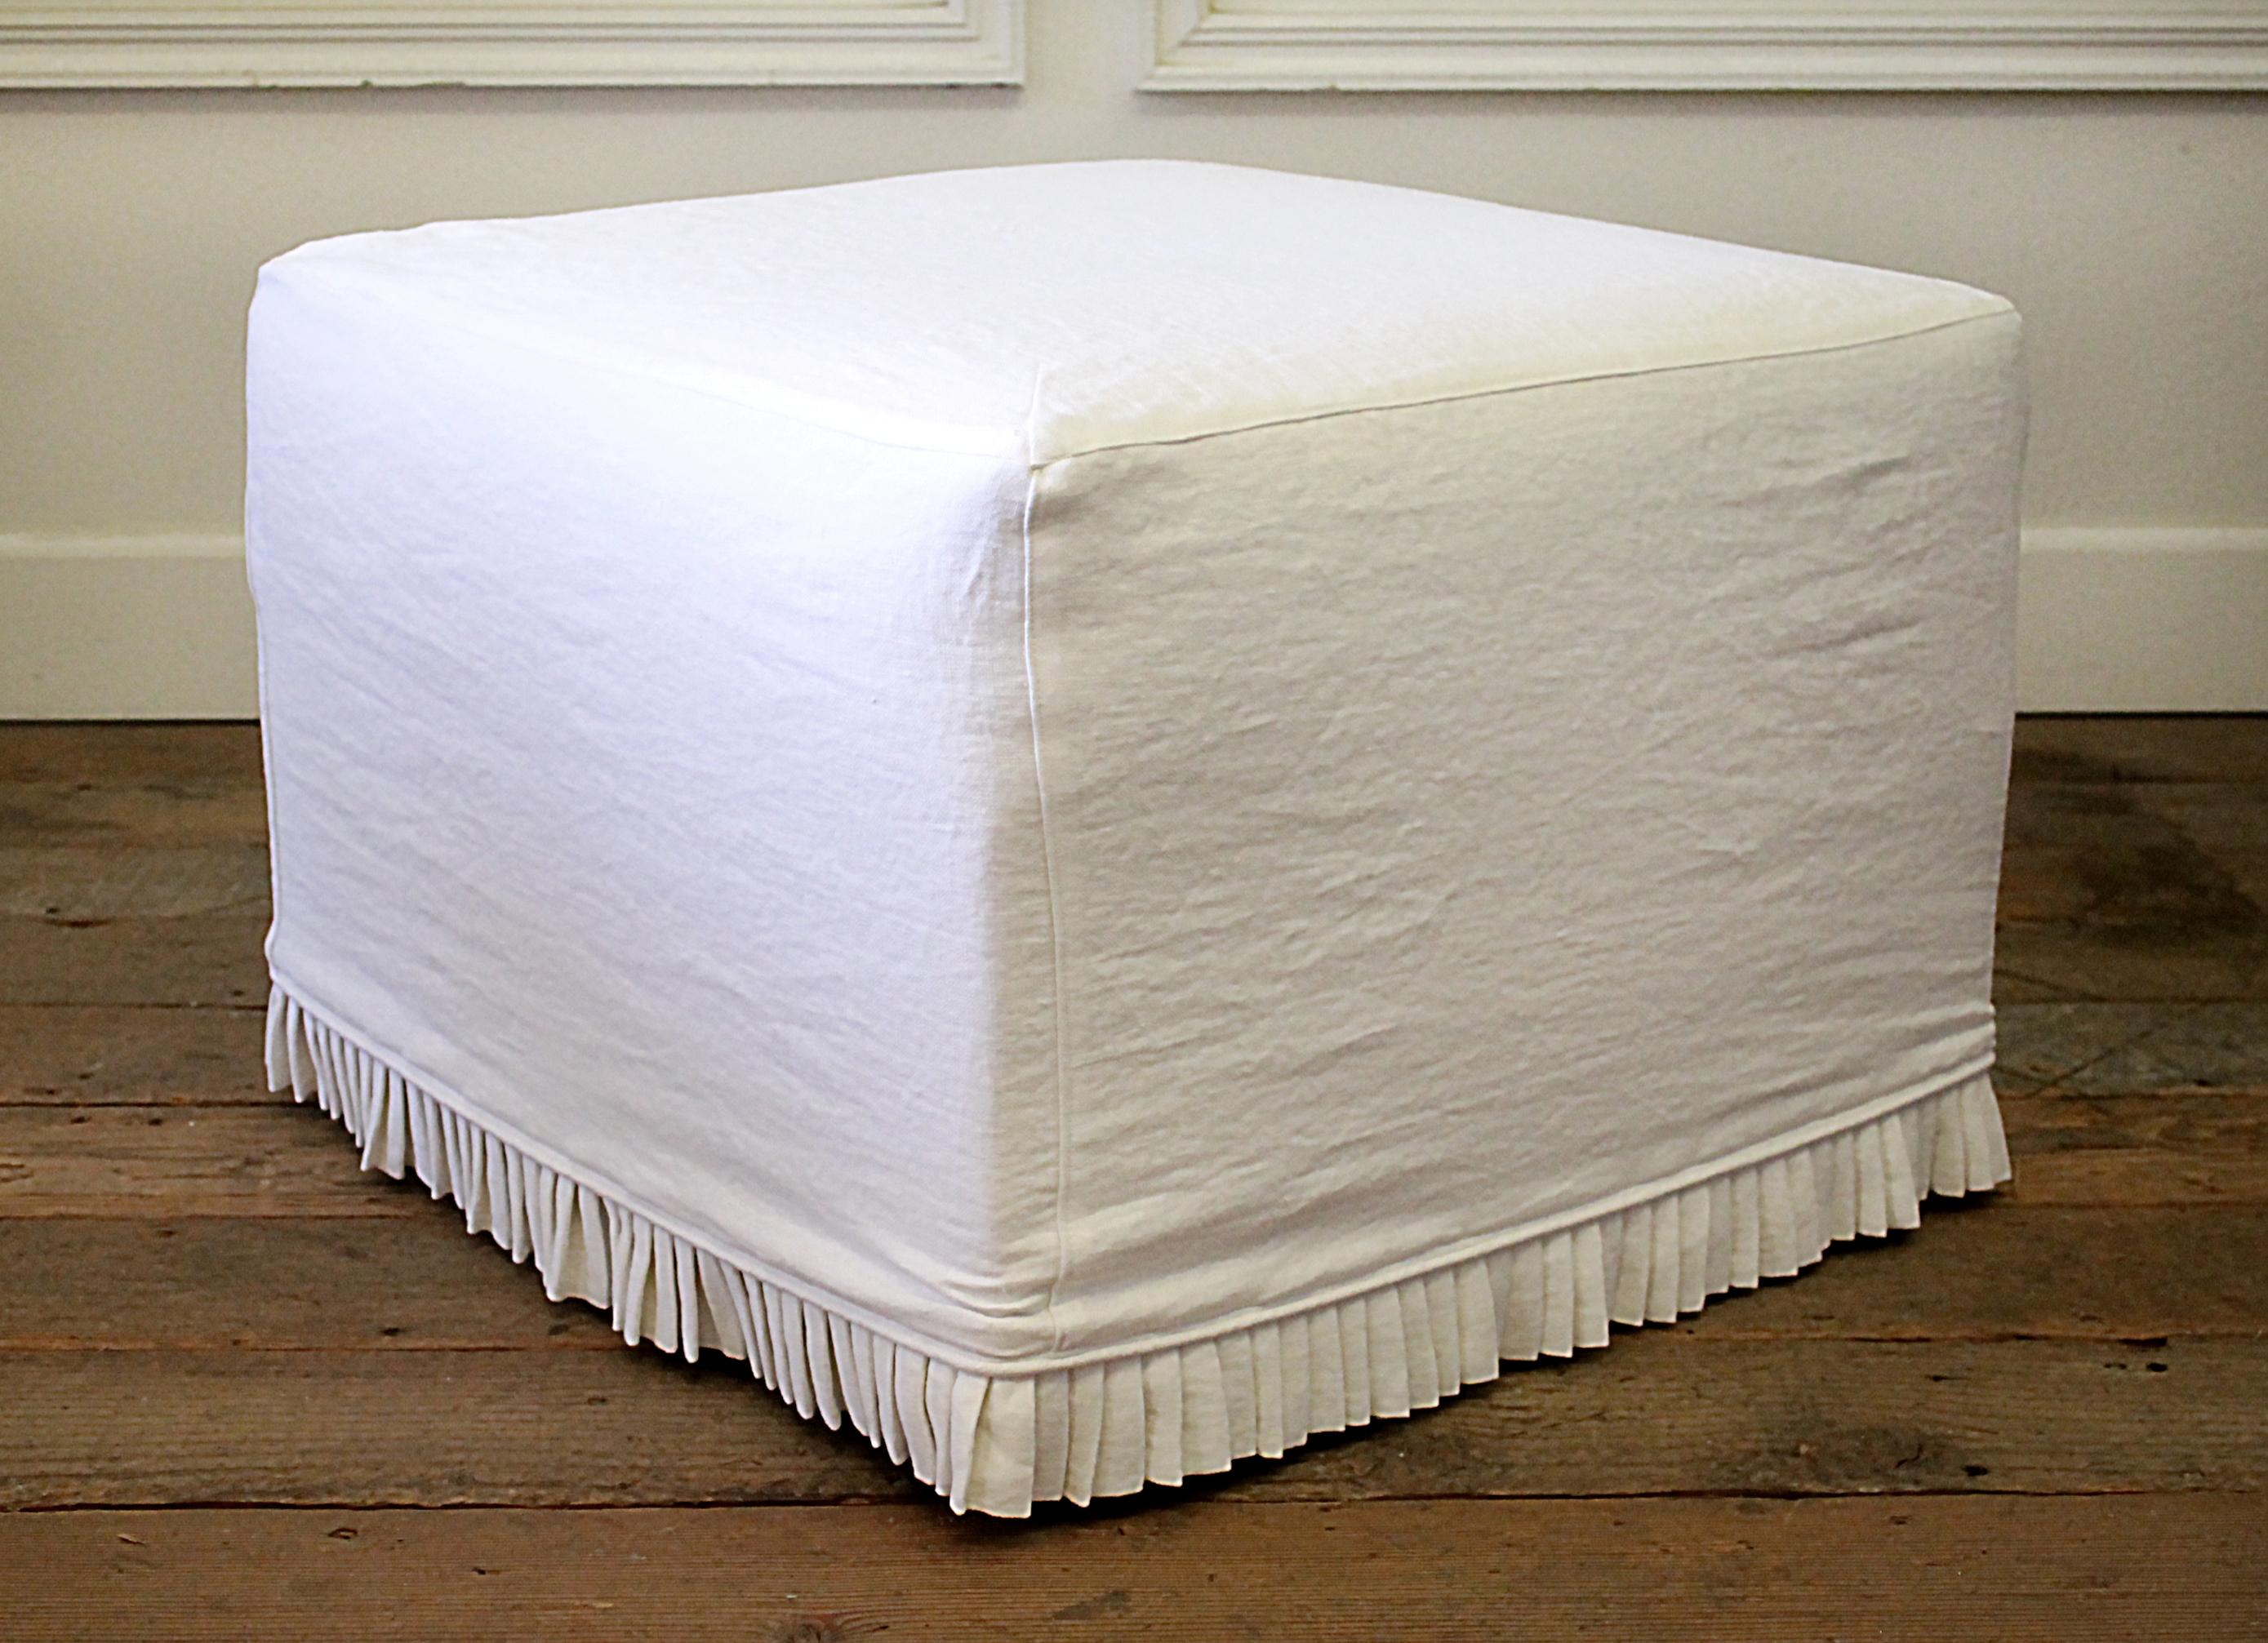 Custom cube Ottoman slip covered in white Belgian Linen with hand pleated ruffle.
Muslin upholstered ottoman, with beautiful white linen slip cover.
We custom made this ottoman with a Belgian linen cover, that can be washed and dried, on low